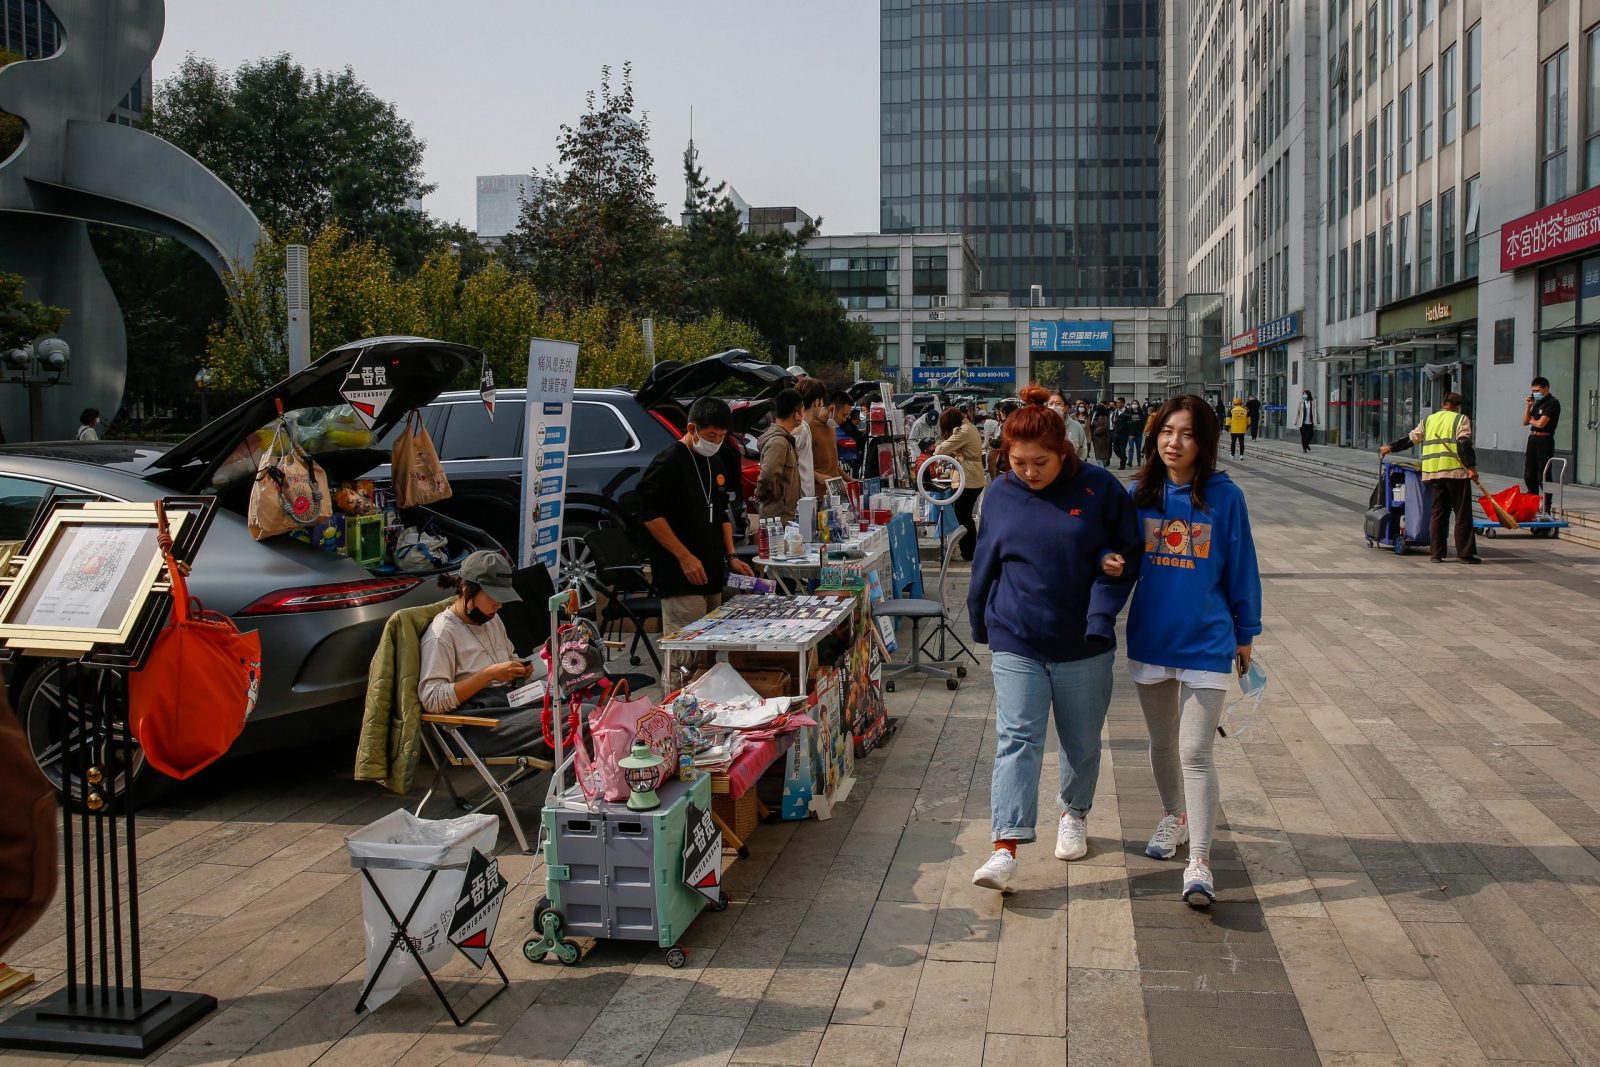 epa10264327 People walk along a car boot fair in Beijing, China, 25 October 2022. China's Gross Domestic Product (GDP) rose to 3.9 percent year-on-year in the third quarter of 2022 which beat the forecast of 3.2-3.3 percent. According to the International Monetary Fund, the forecast for China's growth in 2022 will expand only by 3.2 percent, far from the target of 5.5 percent, the lowest since the 1980's as the economy continues to be disrupted by COVID-19 measures.  EPA/MARK R. CRISTINO